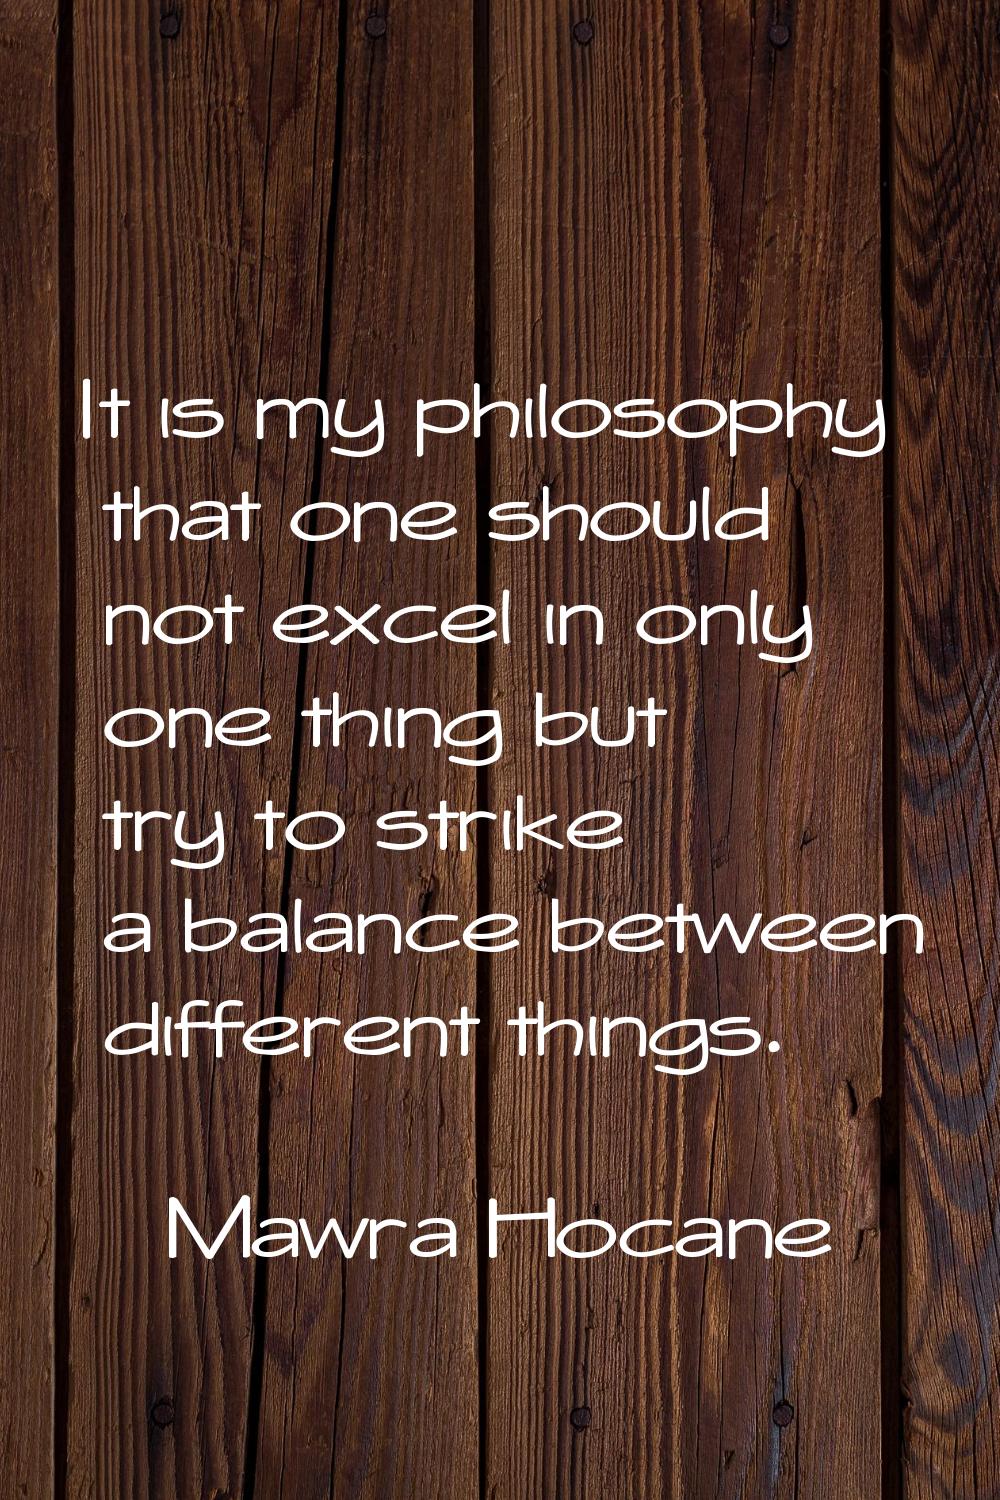 It is my philosophy that one should not excel in only one thing but try to strike a balance between